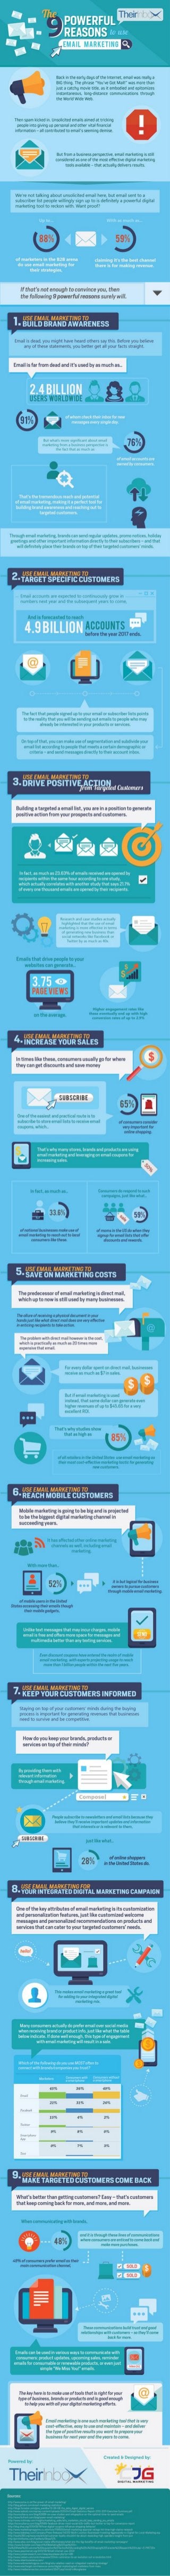 The 9-reasons-to-use-email-marketing